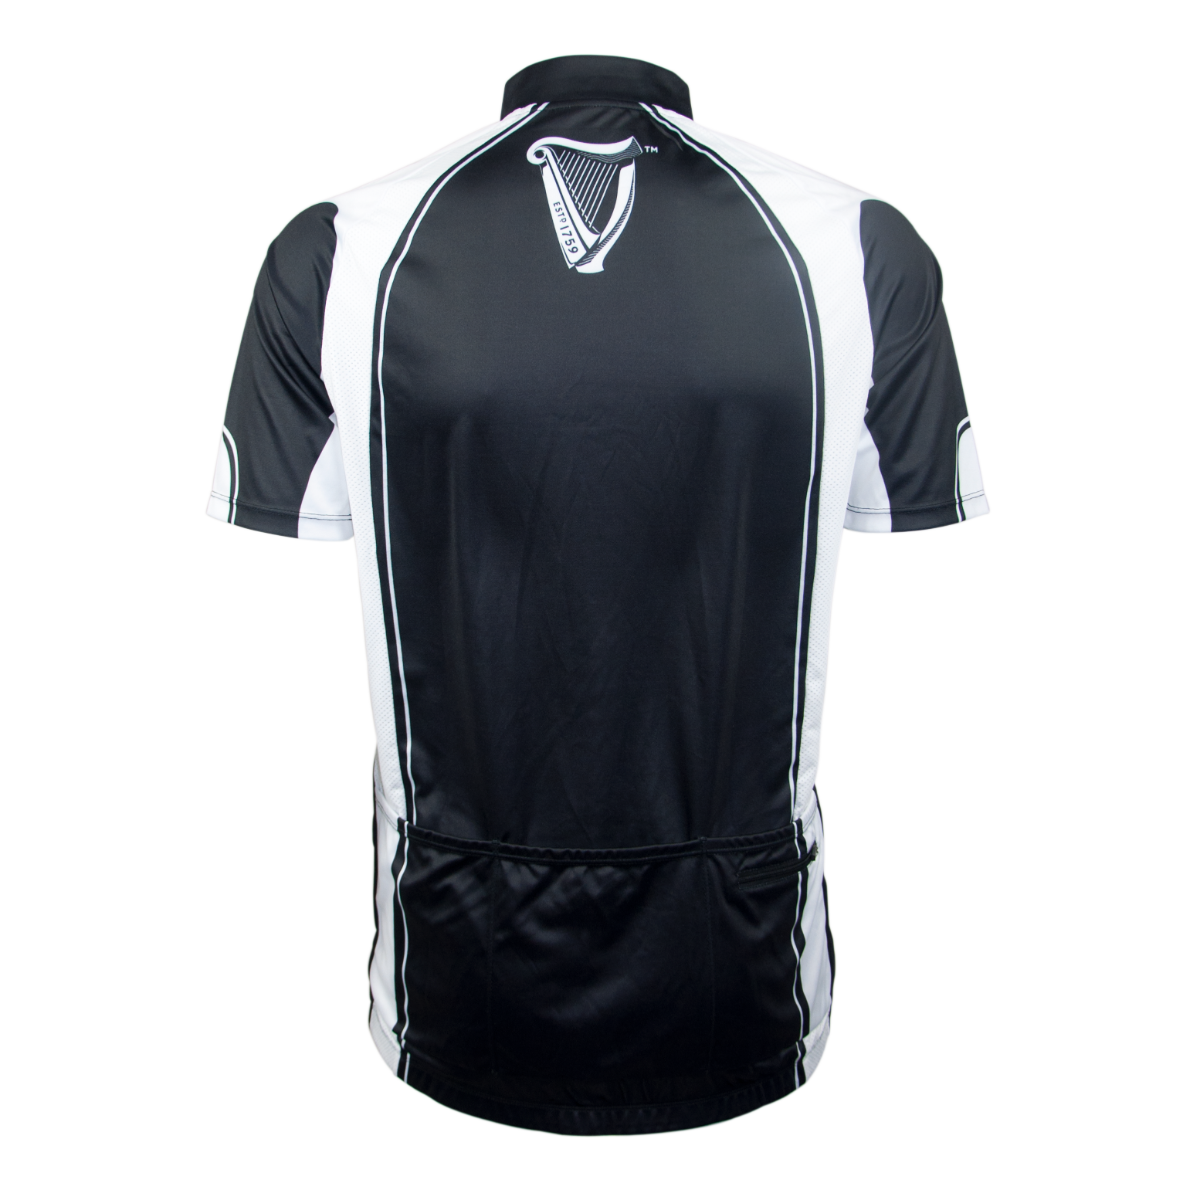 The back view of a men's black and white Guinness Performance Cycling Jersey incorporating performance elements.